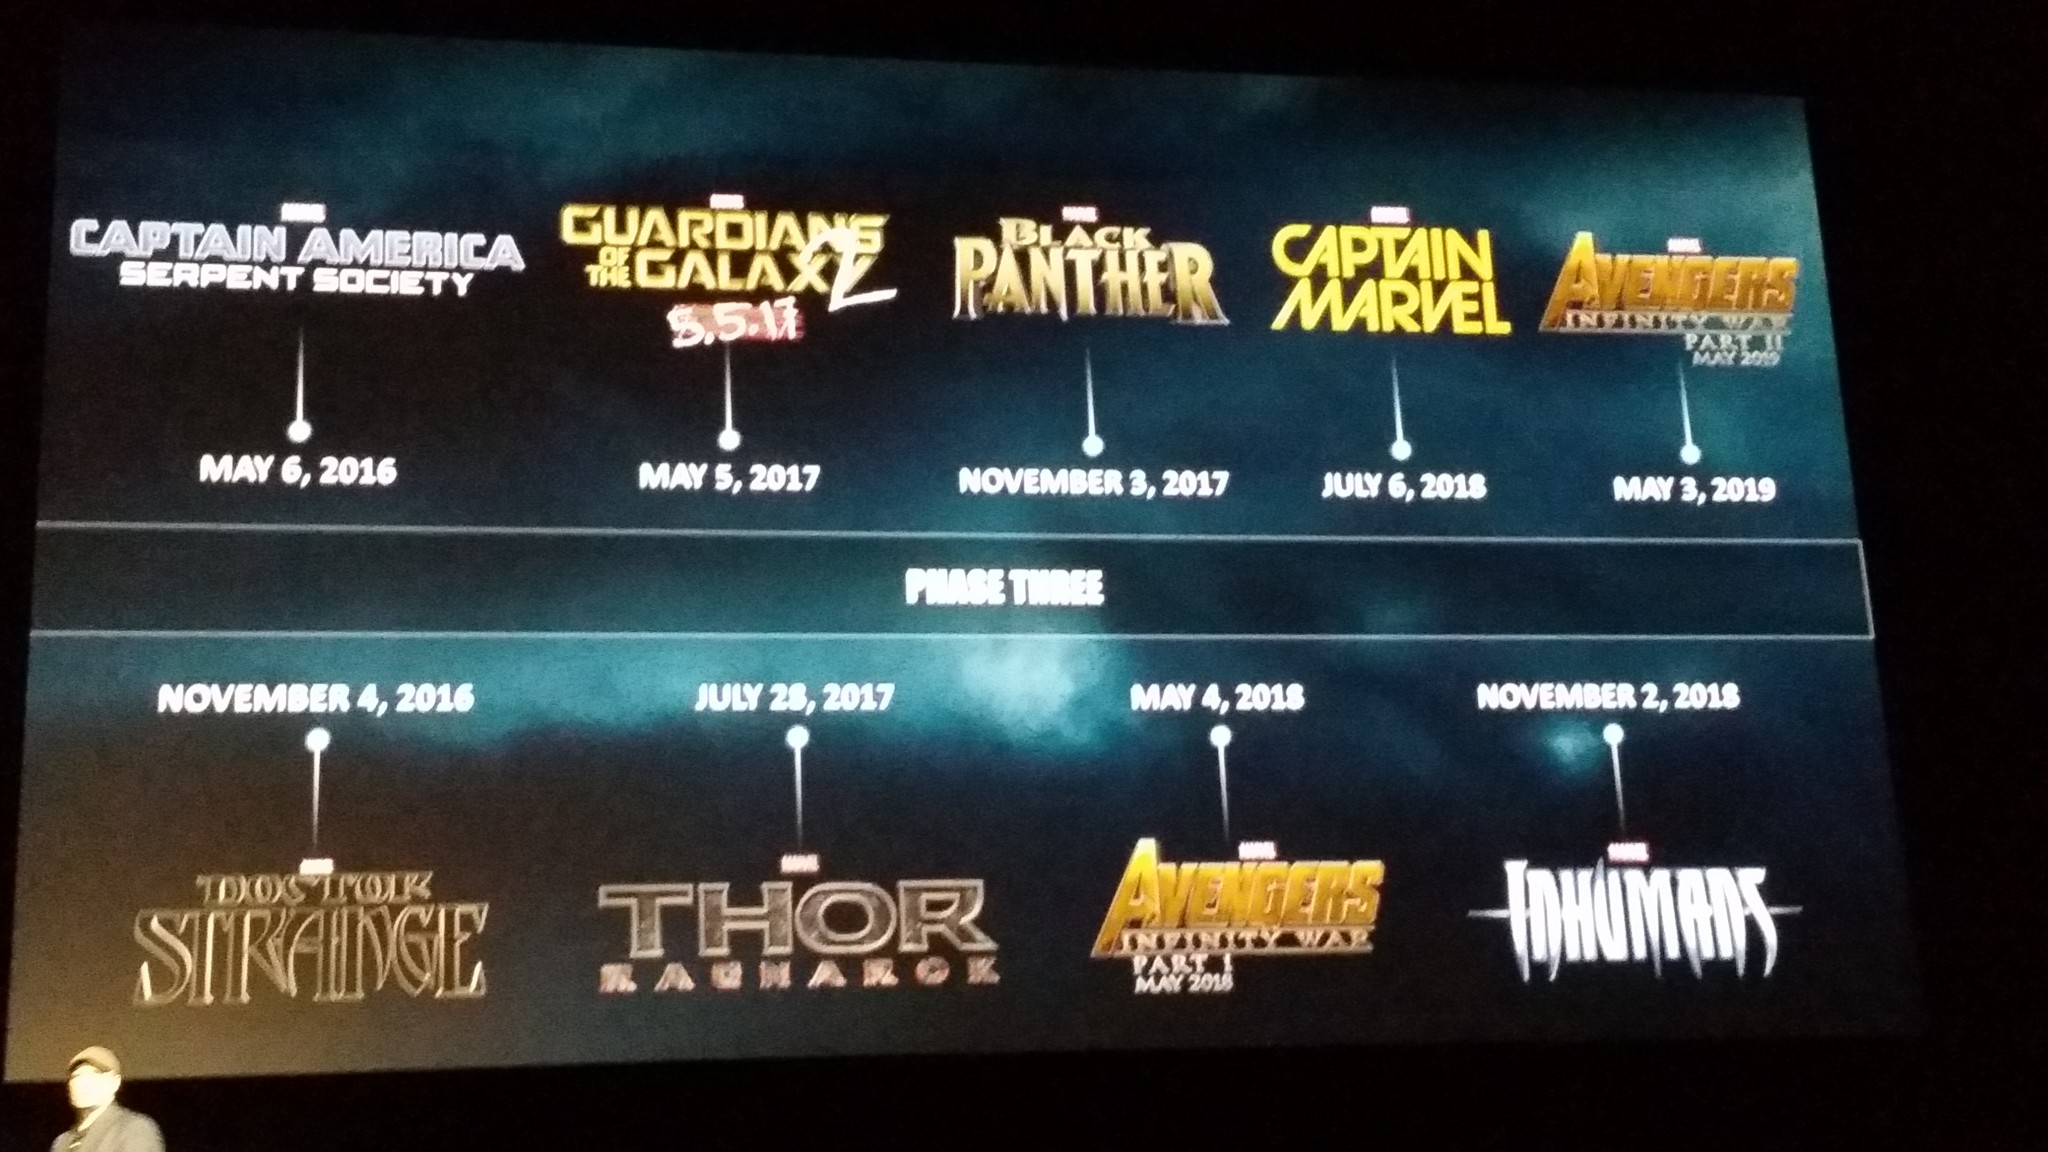 Marvel Movie Lineup Announcement Has Fans Cheering!